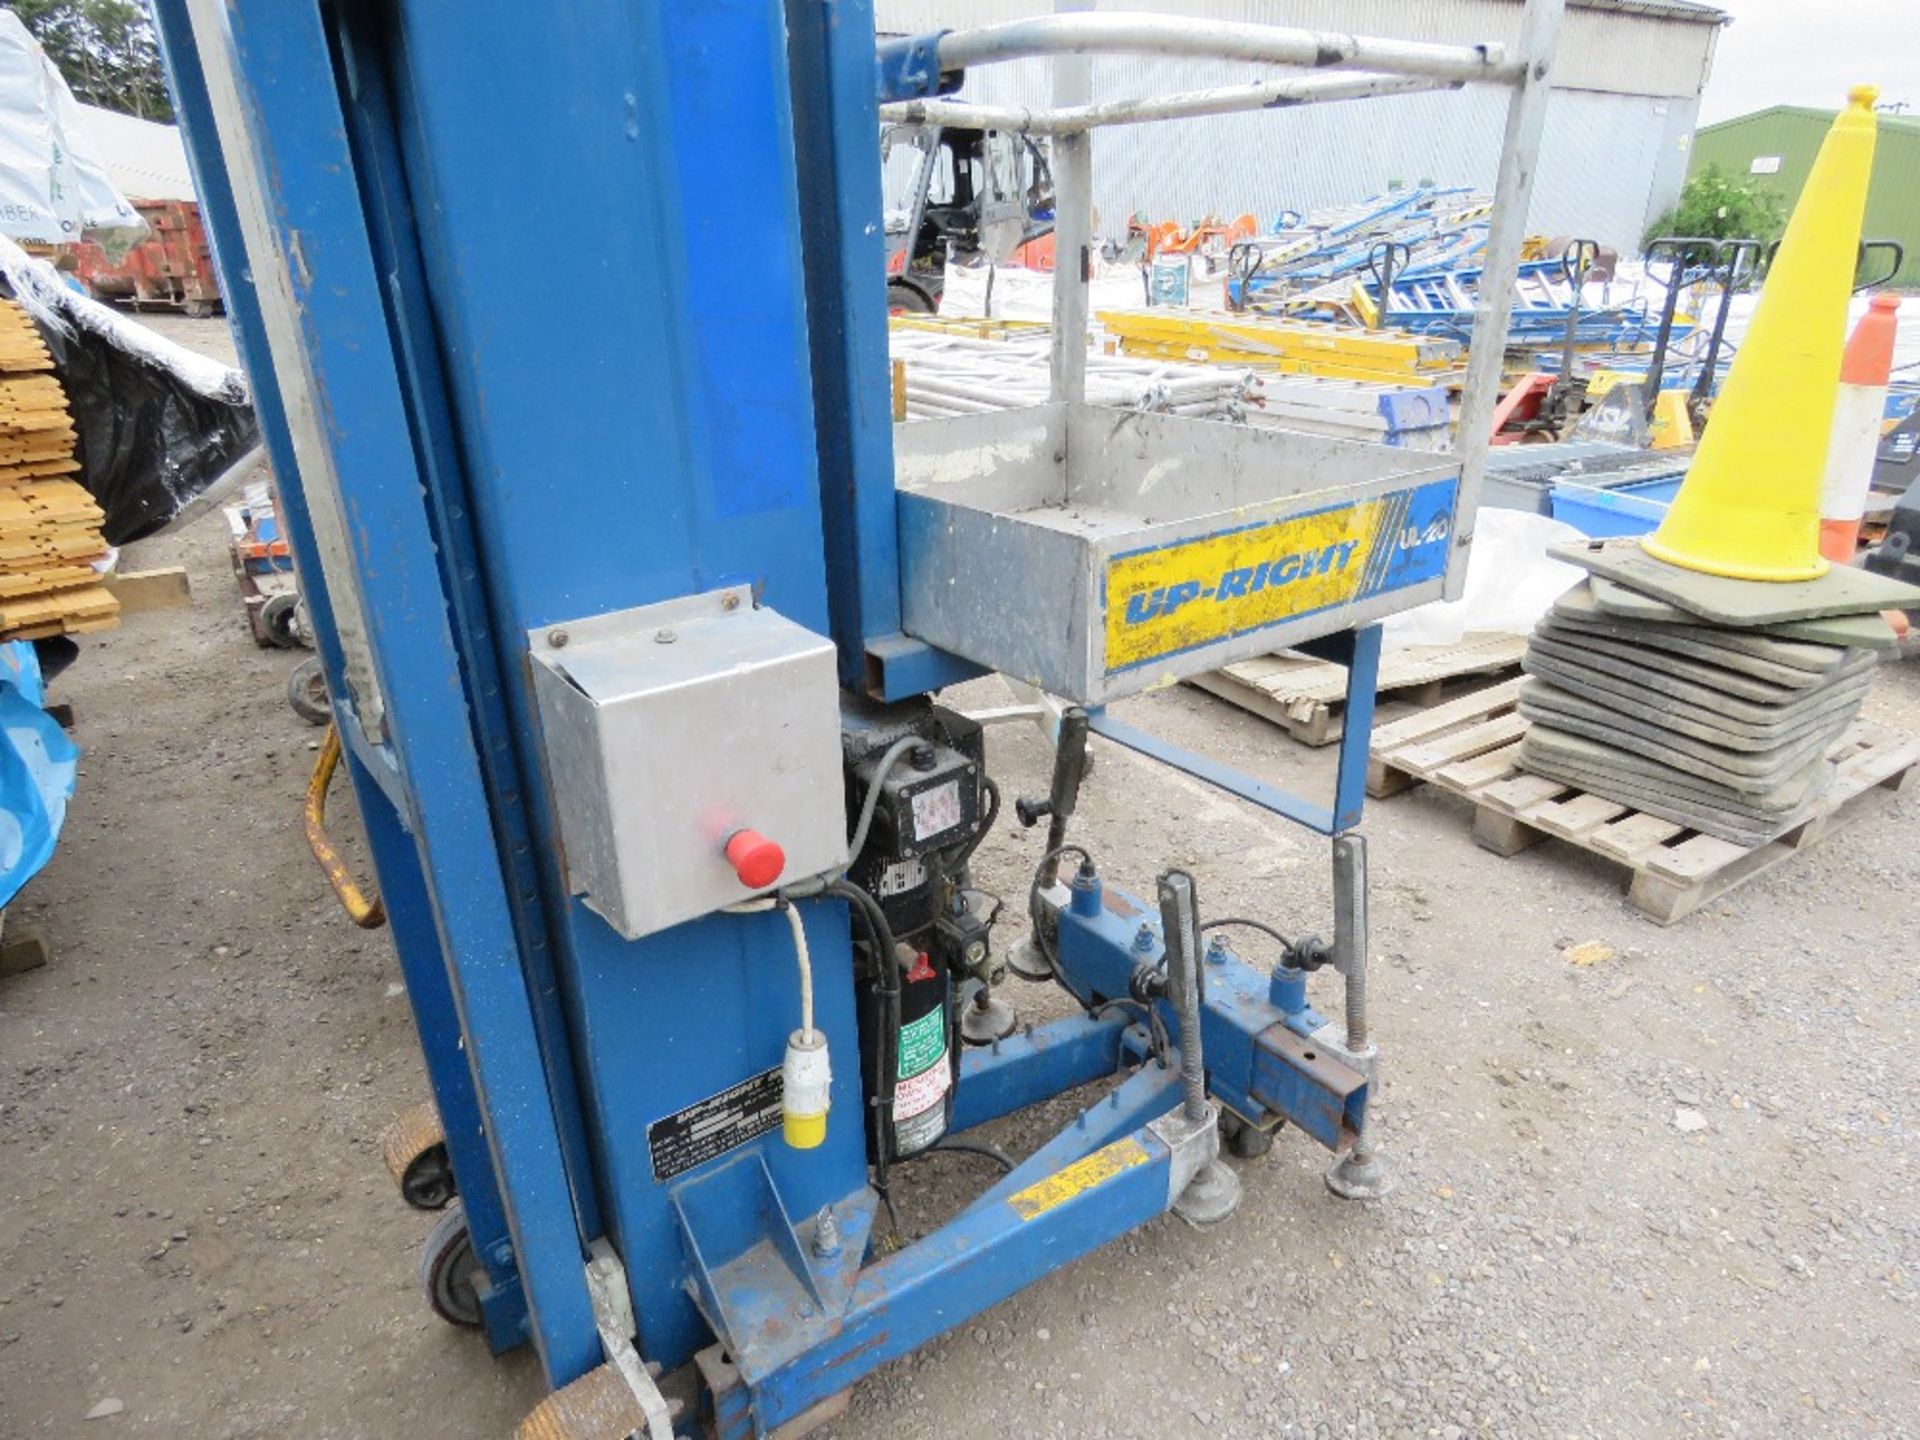 UPRIGHT UL20 MAST LIFT UNIT, 20 FOOT WORK HEIGHT. THIS LOT IS SOLD UNDER THE AUCTIONEERS MARGIN S - Image 5 of 5